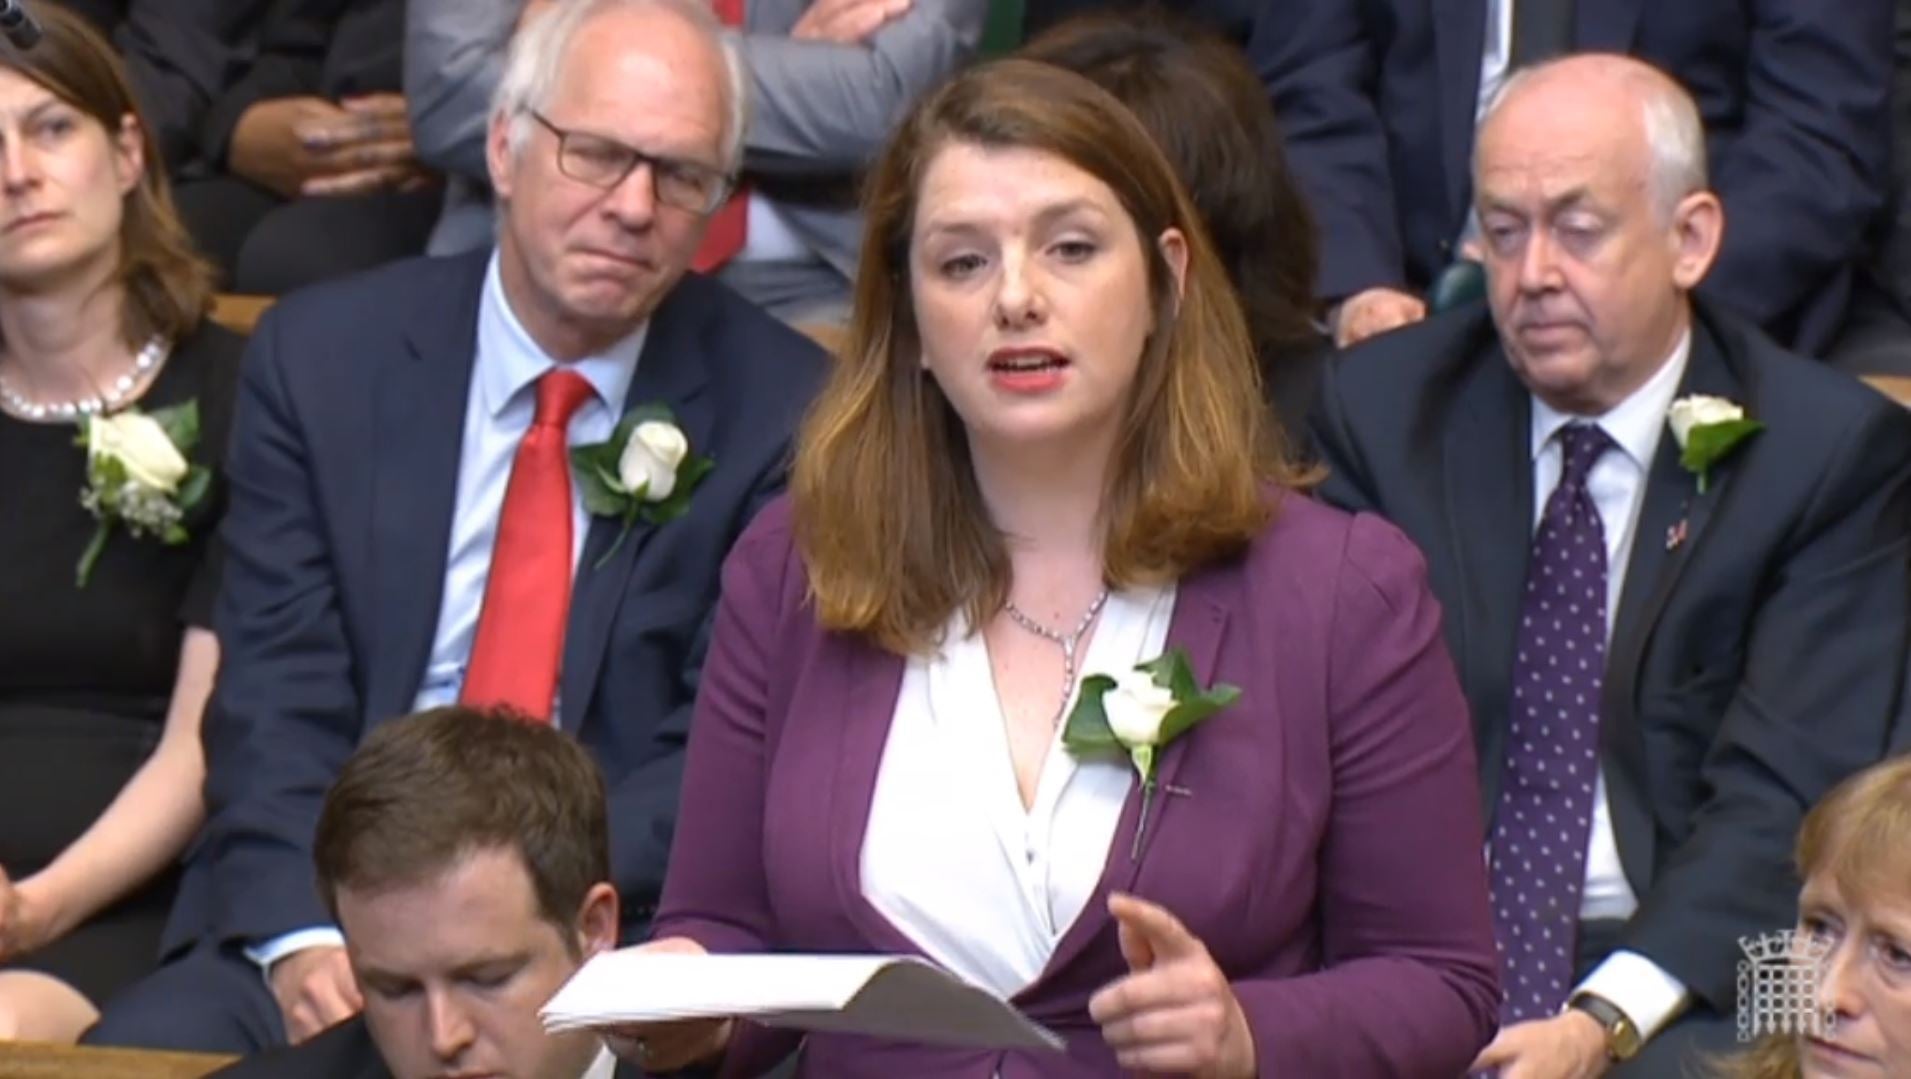 Shadow Sports Minister Alison McGovern has formally pledged her support to the Fair Game campaign